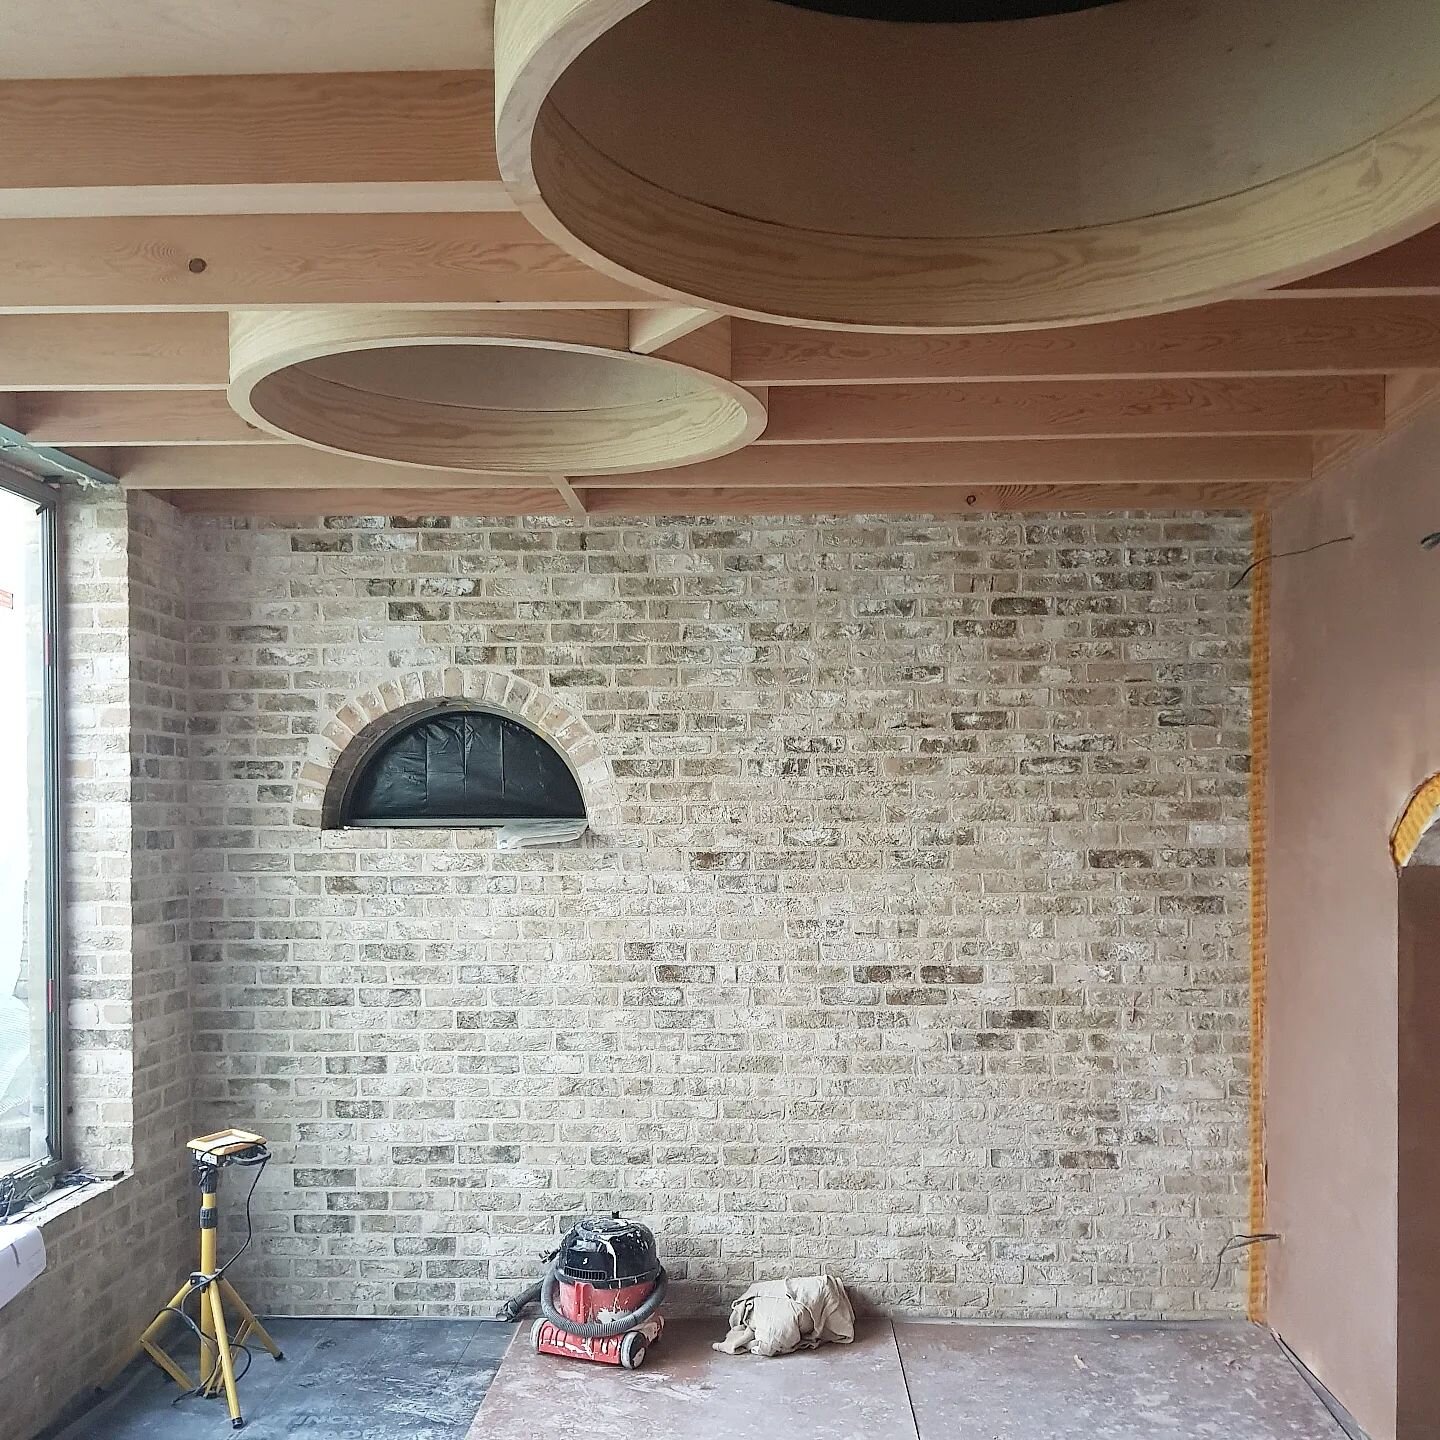 Our Camden house project is nearing the final stages. Rooflights are arriving today which will completely open up this space. 
Final push @lacon_db 
.
.
.
#whitemanarchitects #camden #london #extensions #dontmoveimprove #brickwork #brick #arch #roofl